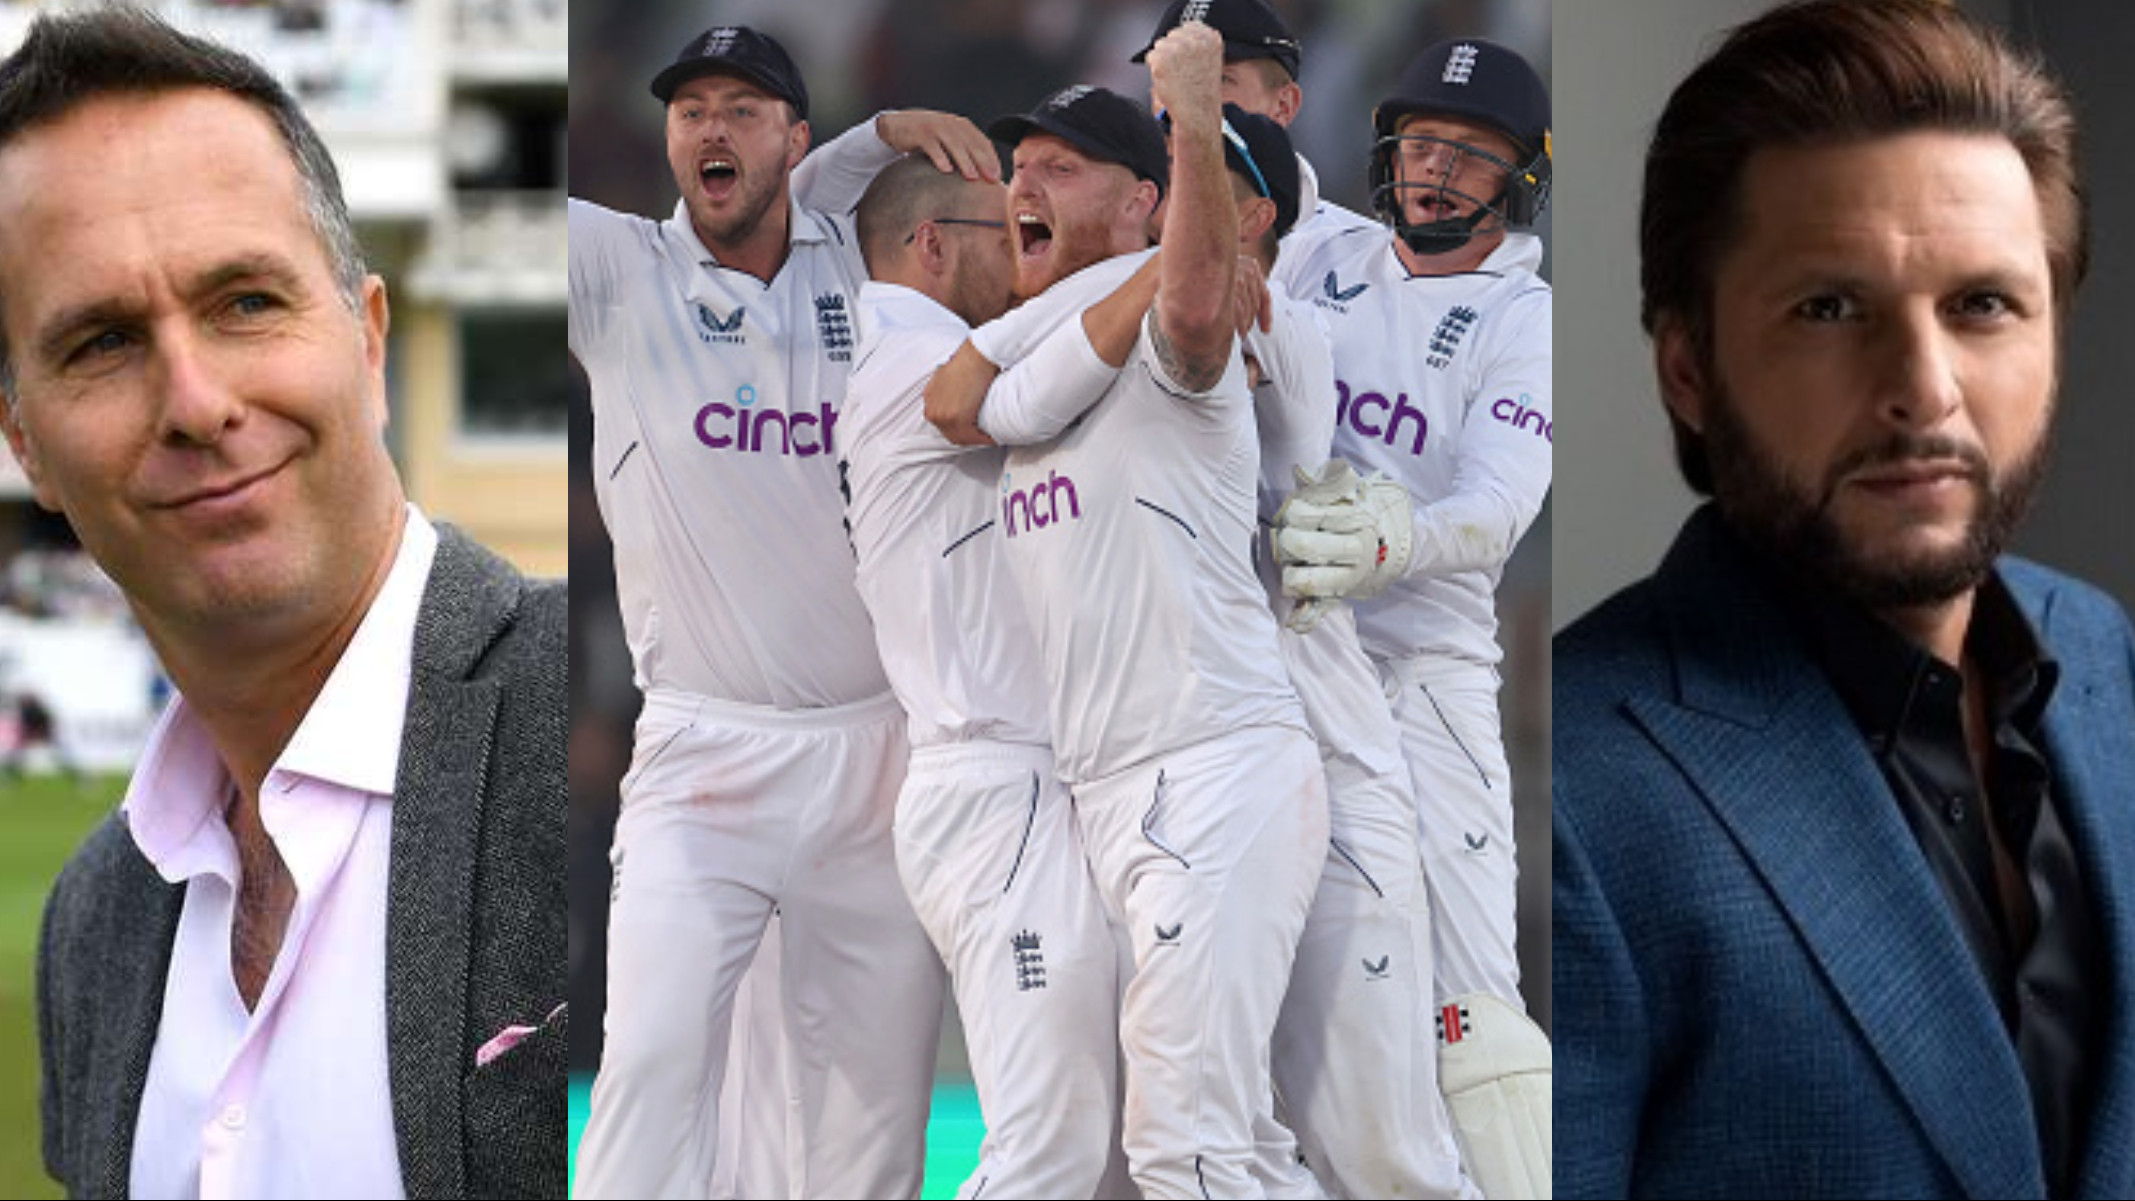 PAK v ENG 2022: Cricket fraternity reacts as England defeats Pakistan in 1st Test by 74 runs in Rawalpindi